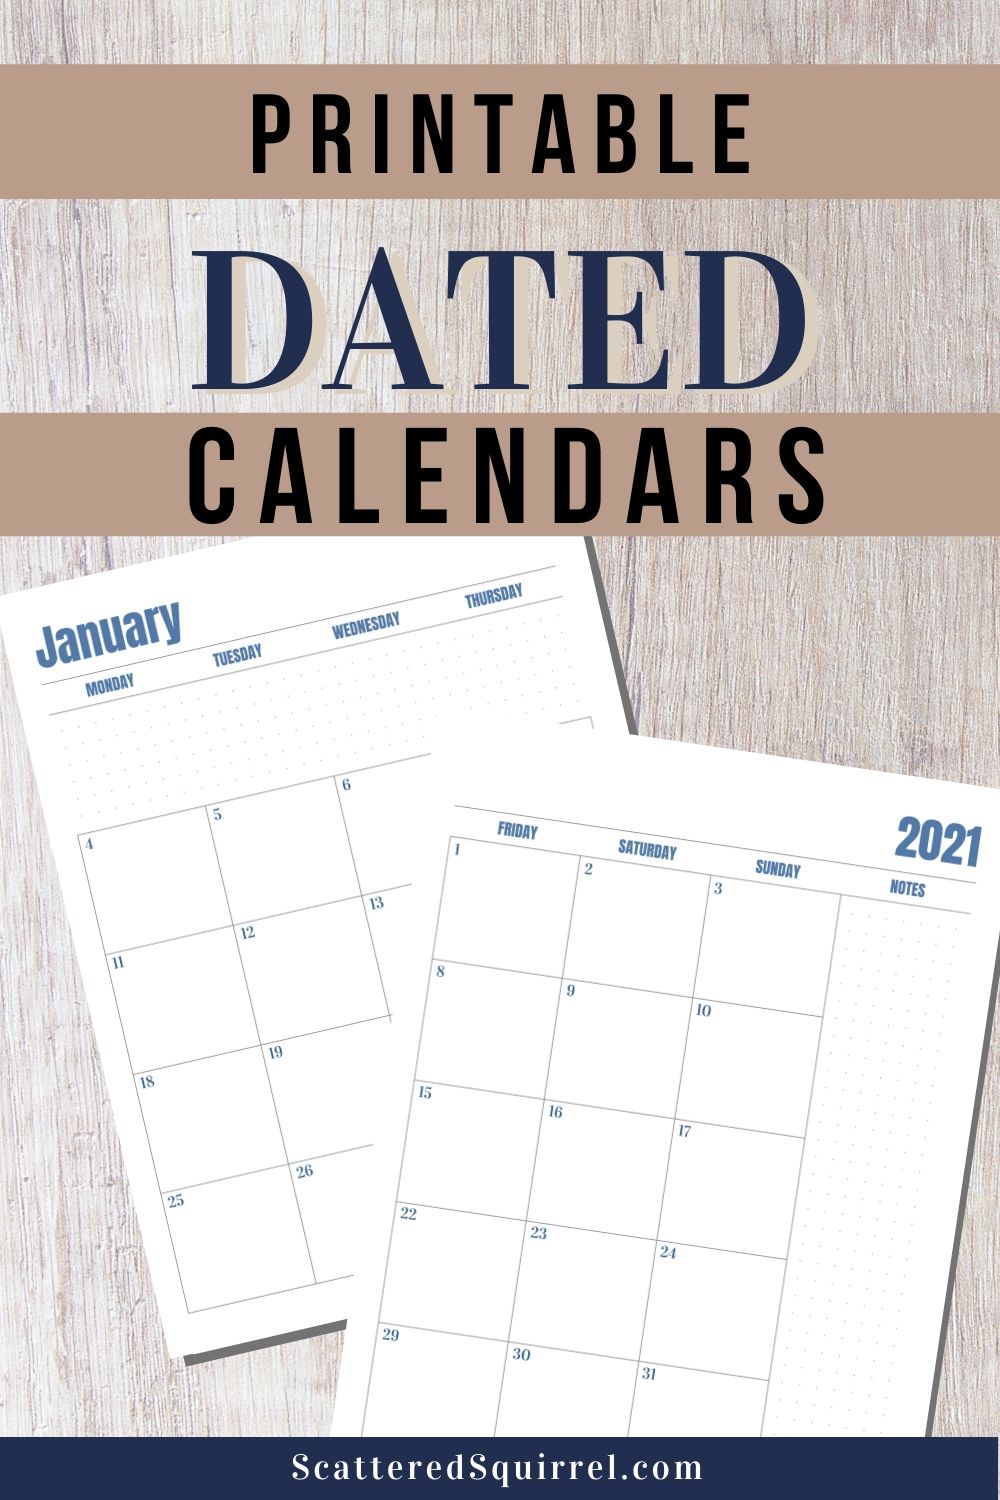 dated-calendars-scattered-squirrel